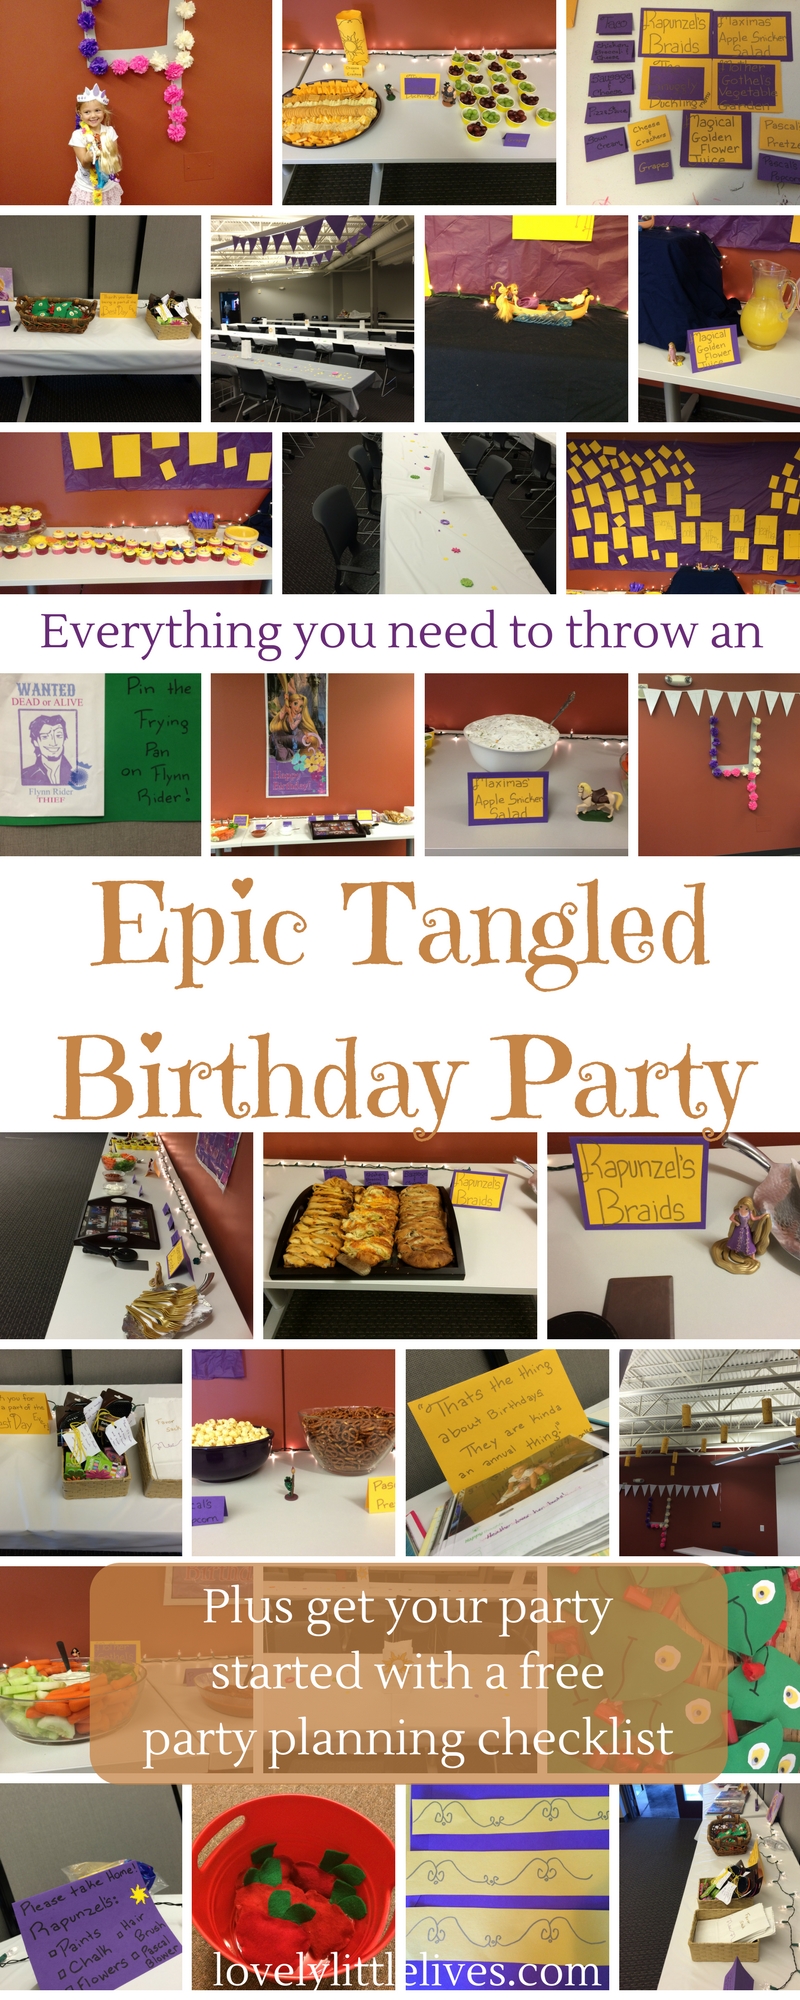 Everything you need to throw an Epic Tangled Birthday Party